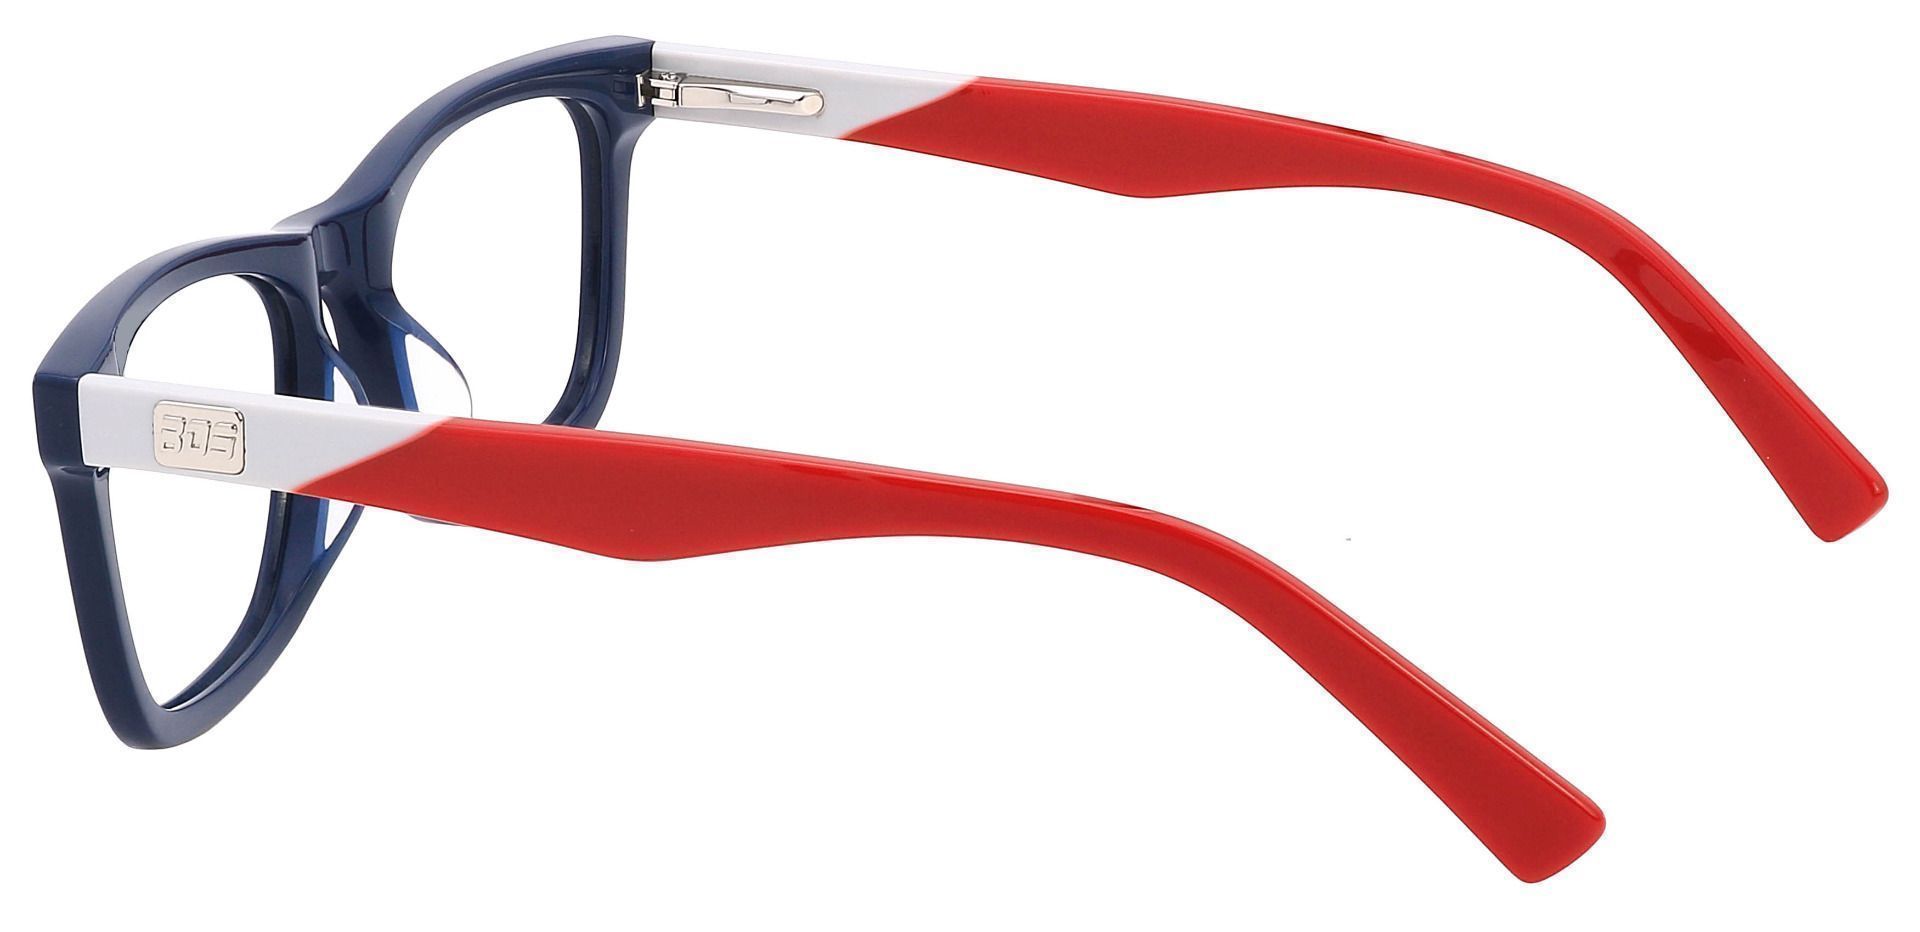 Newbury Rectangle Non-Rx Glasses - The Frame Is Blue And Red